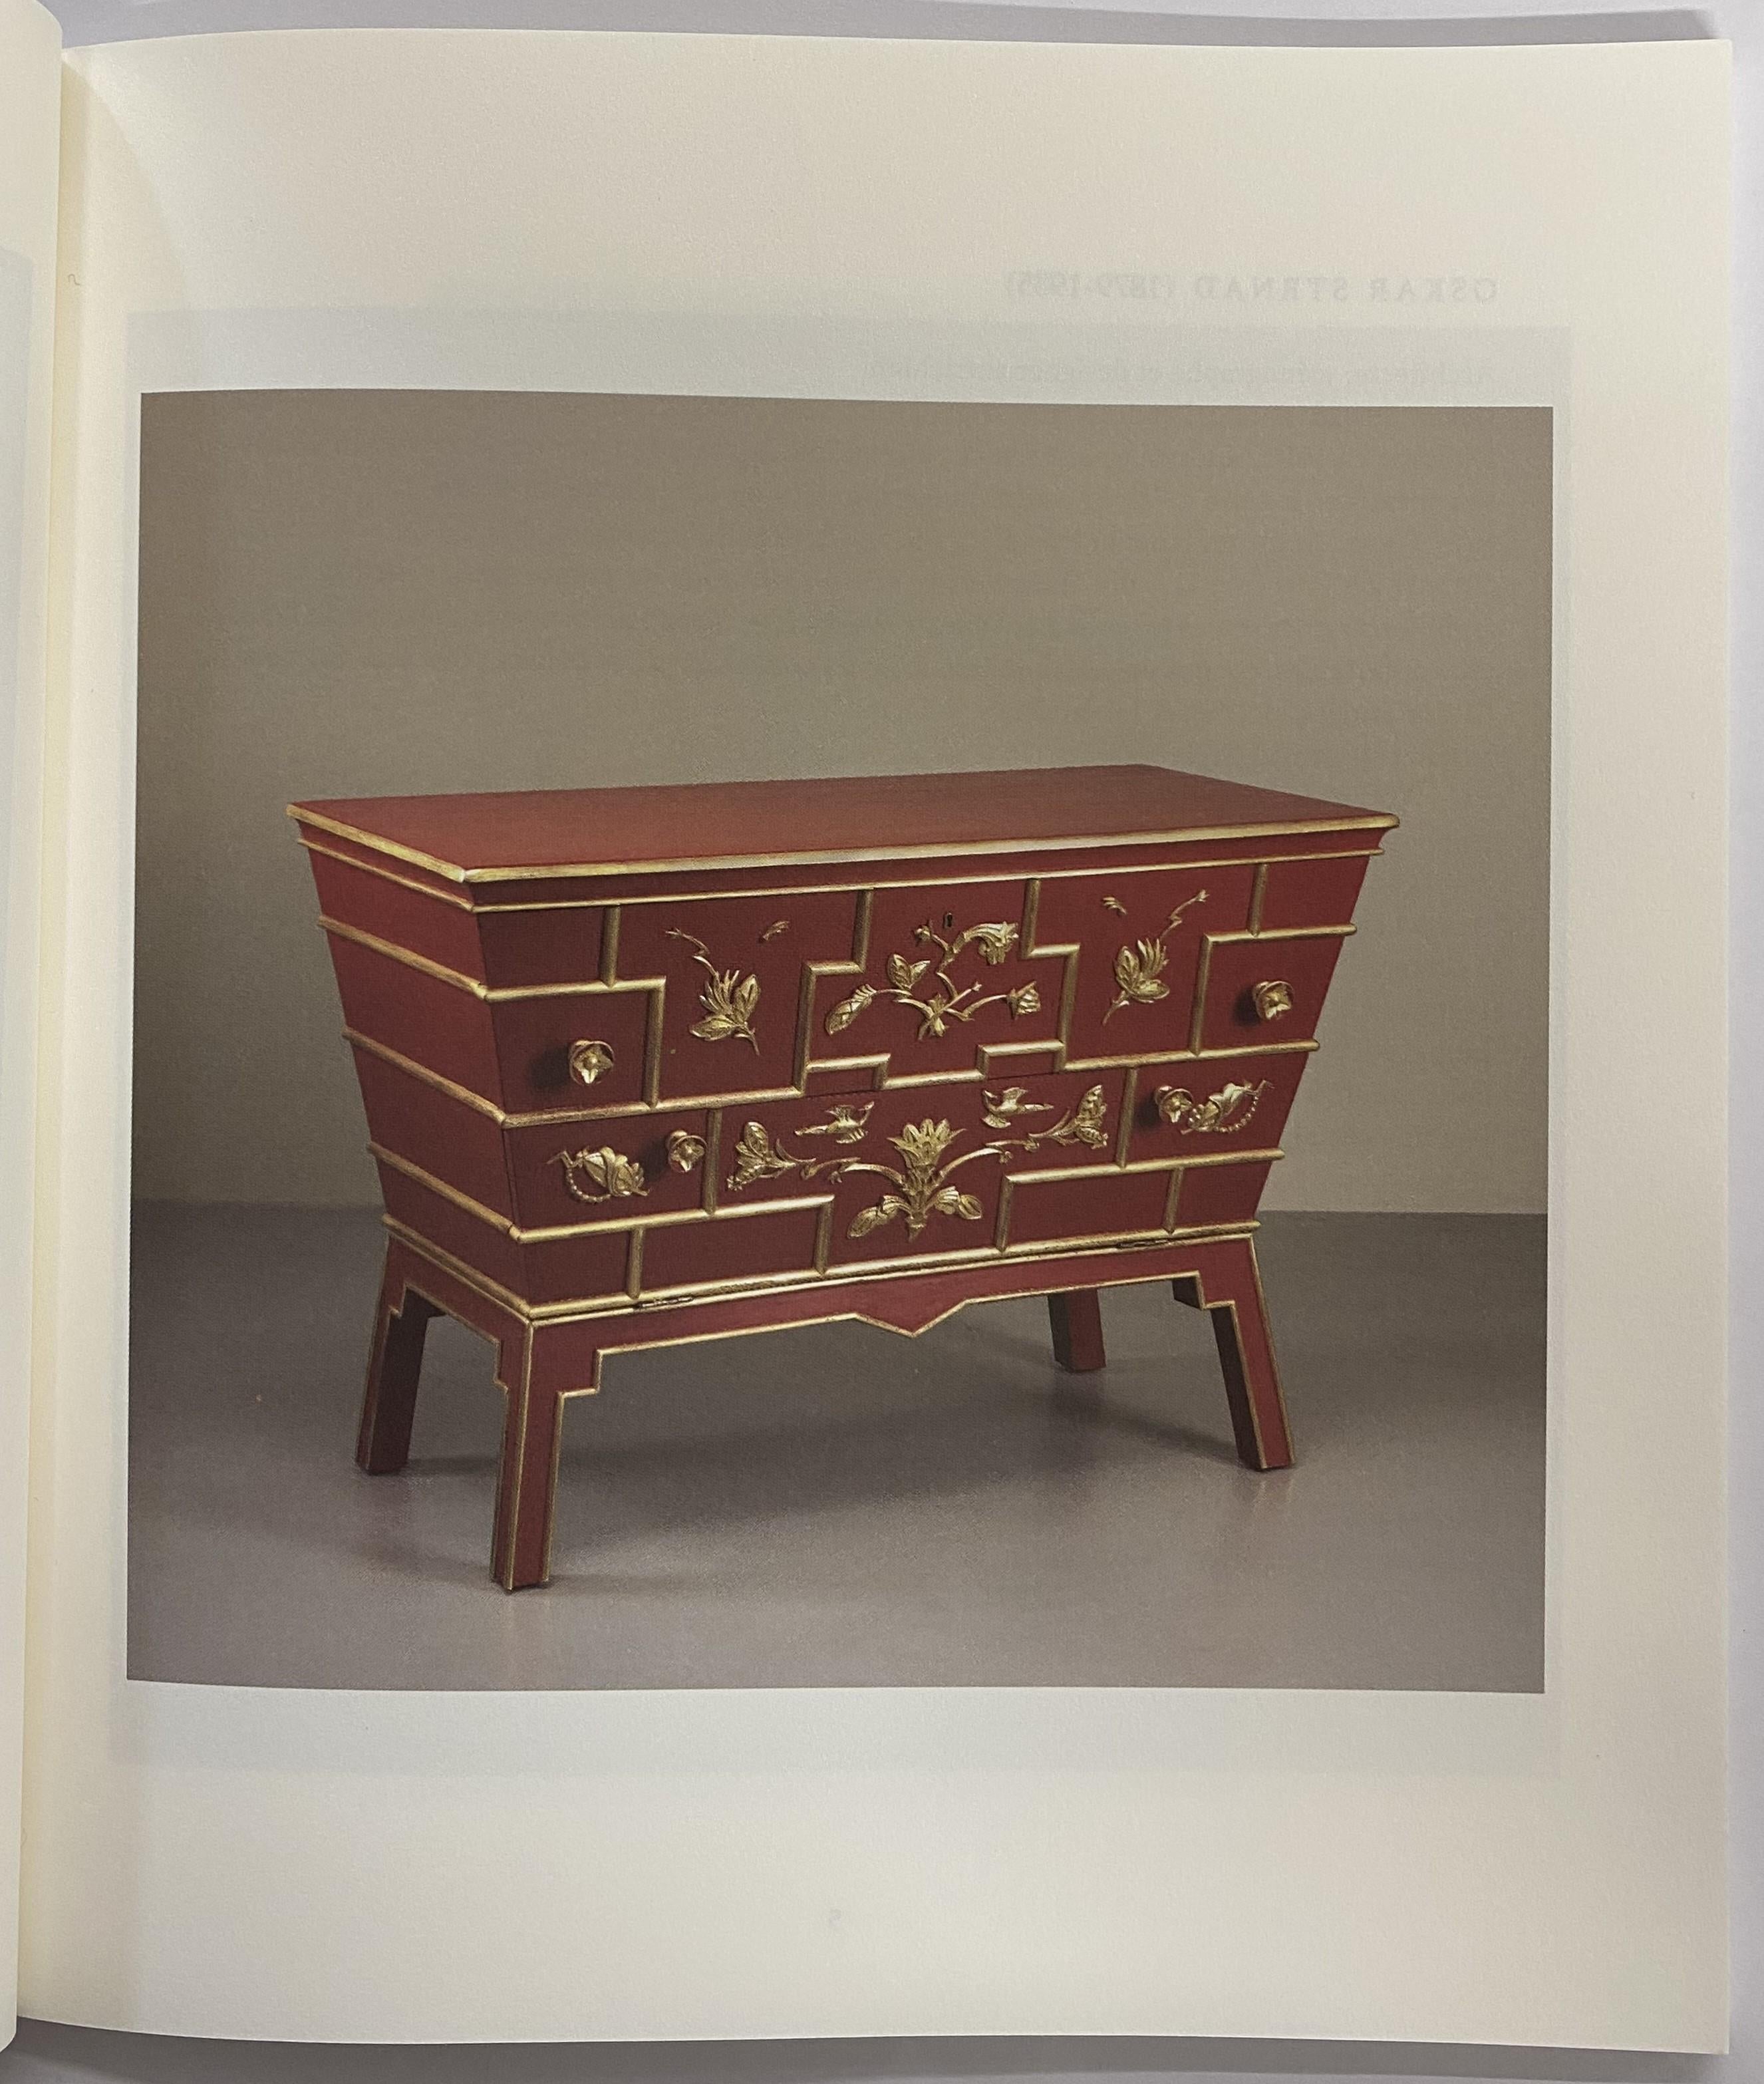 Superb dealer's catalogue of Art Deco and Modernist furniture and decorative arts, primarily from Scandinavia and the U.S. Elegantly designed and printed, with beautiful typography and excellent colour photos of 29 exquisite and rare items, all